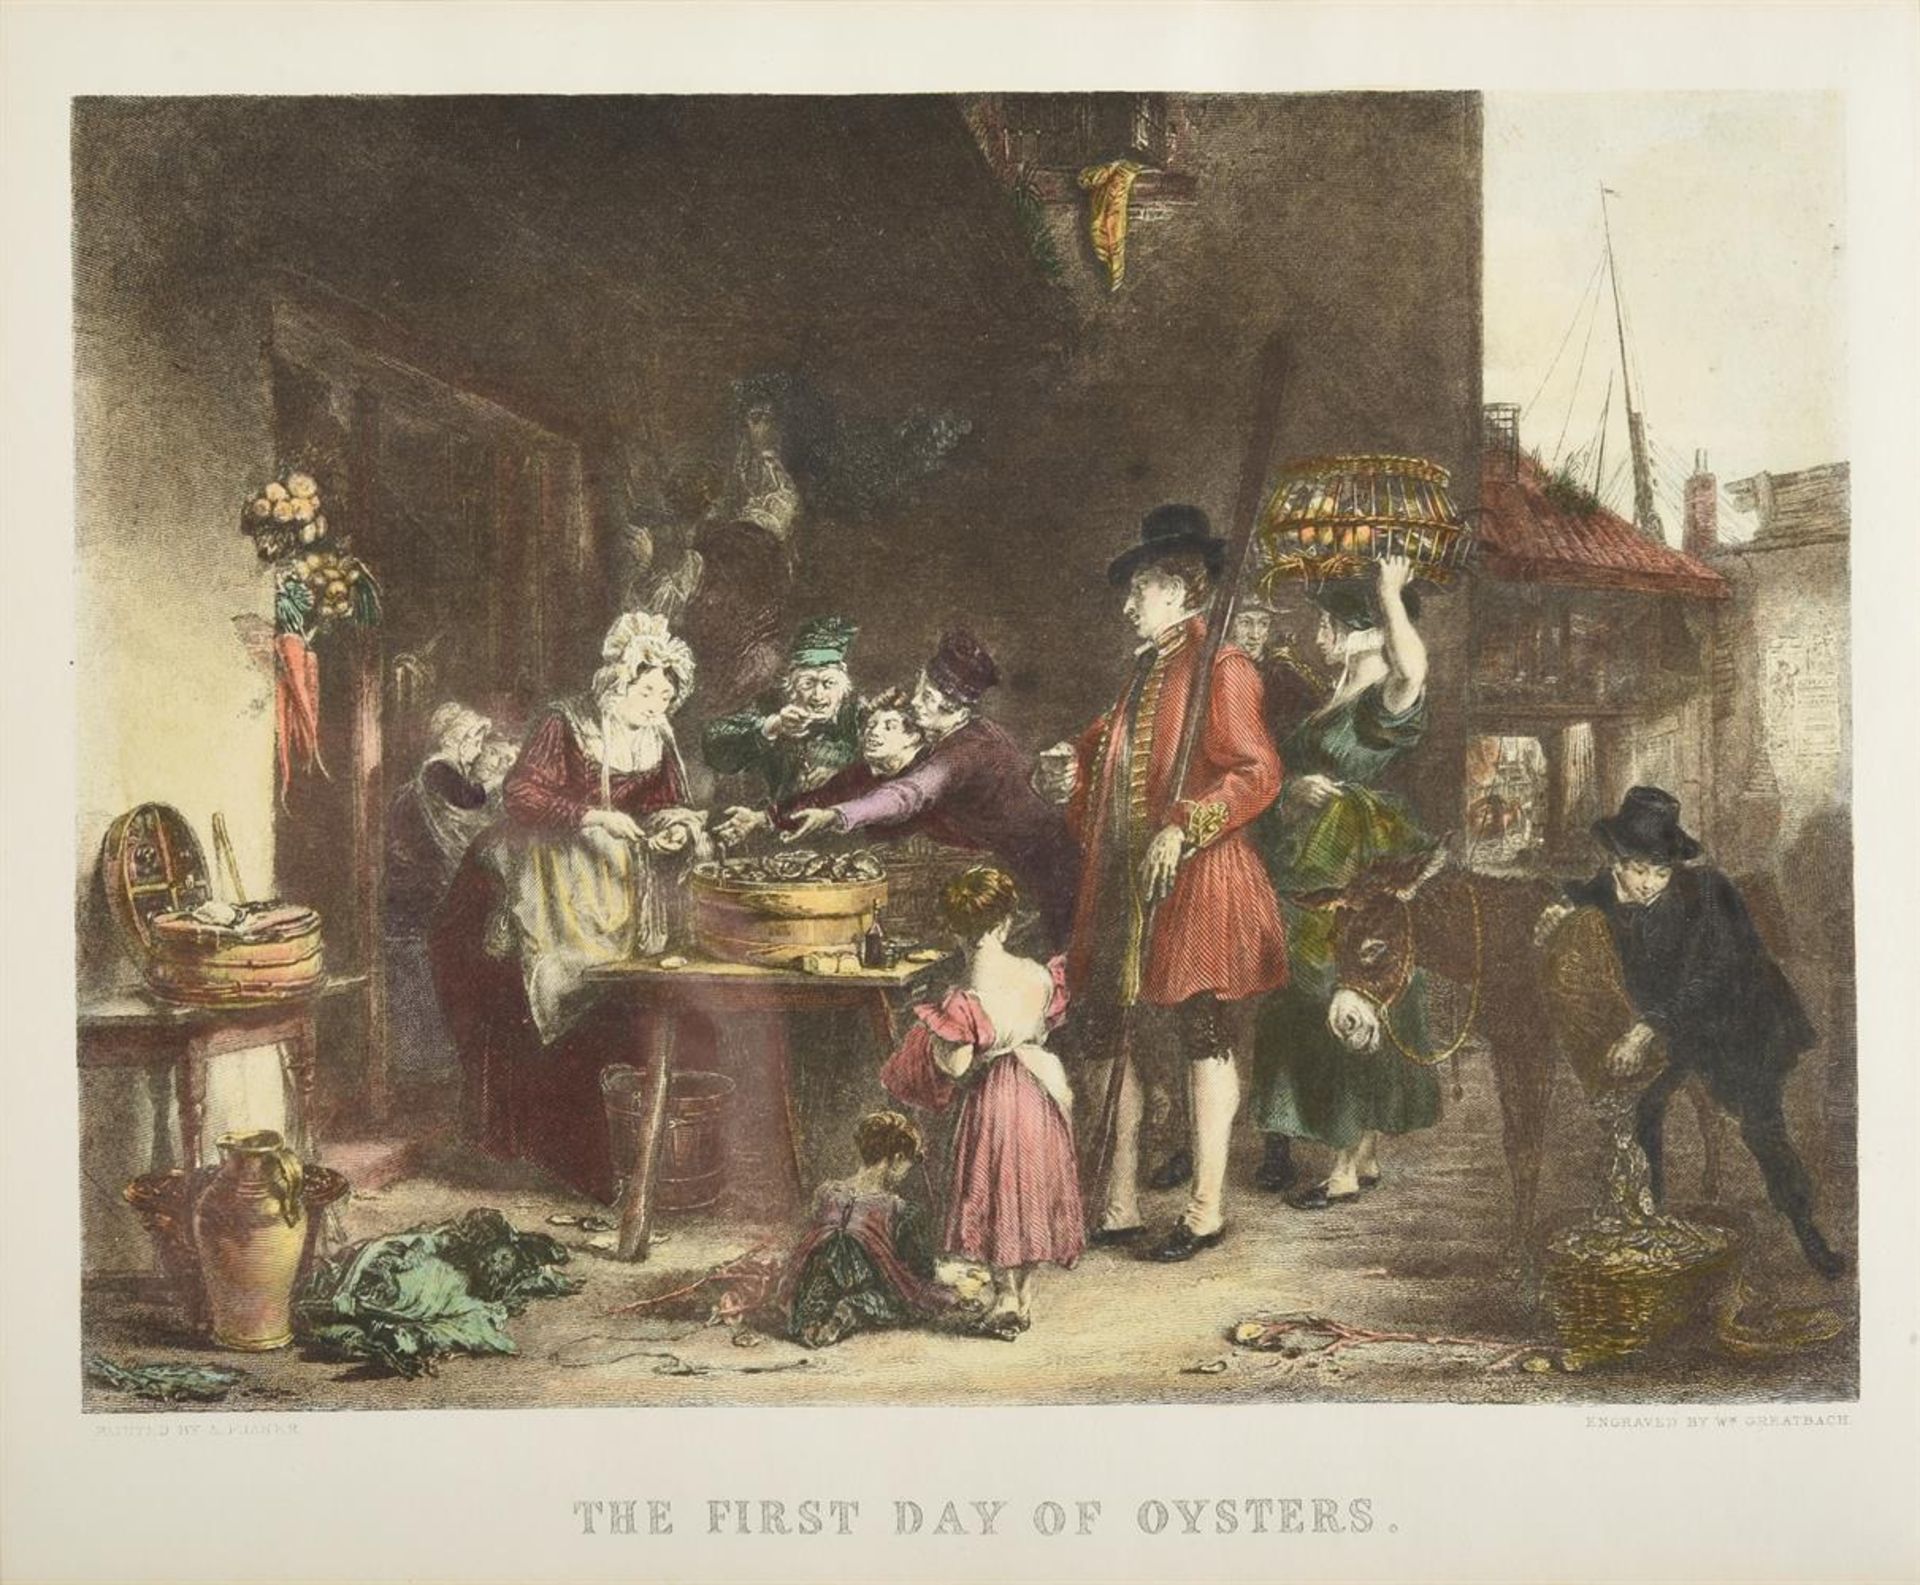 William Greatbach (British 1802-1885), after Alexander Fraser, The First day of Oysters